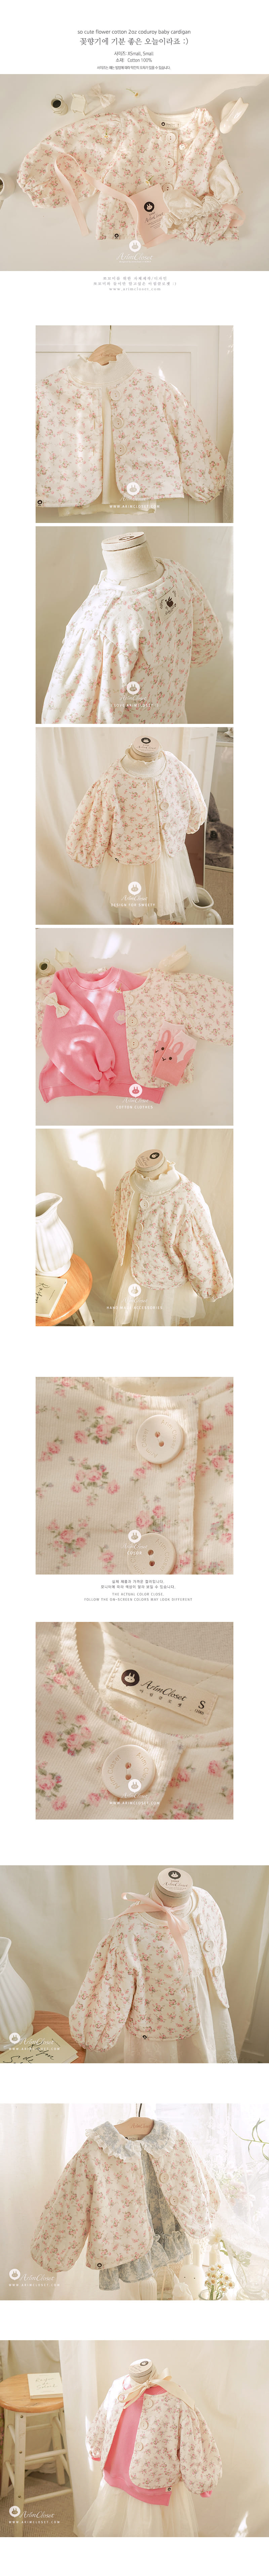 Arim Closet - Korean Baby Fashion - #babyoutfit - A Pleasant Day With The Scent Of Flowers Cardigan